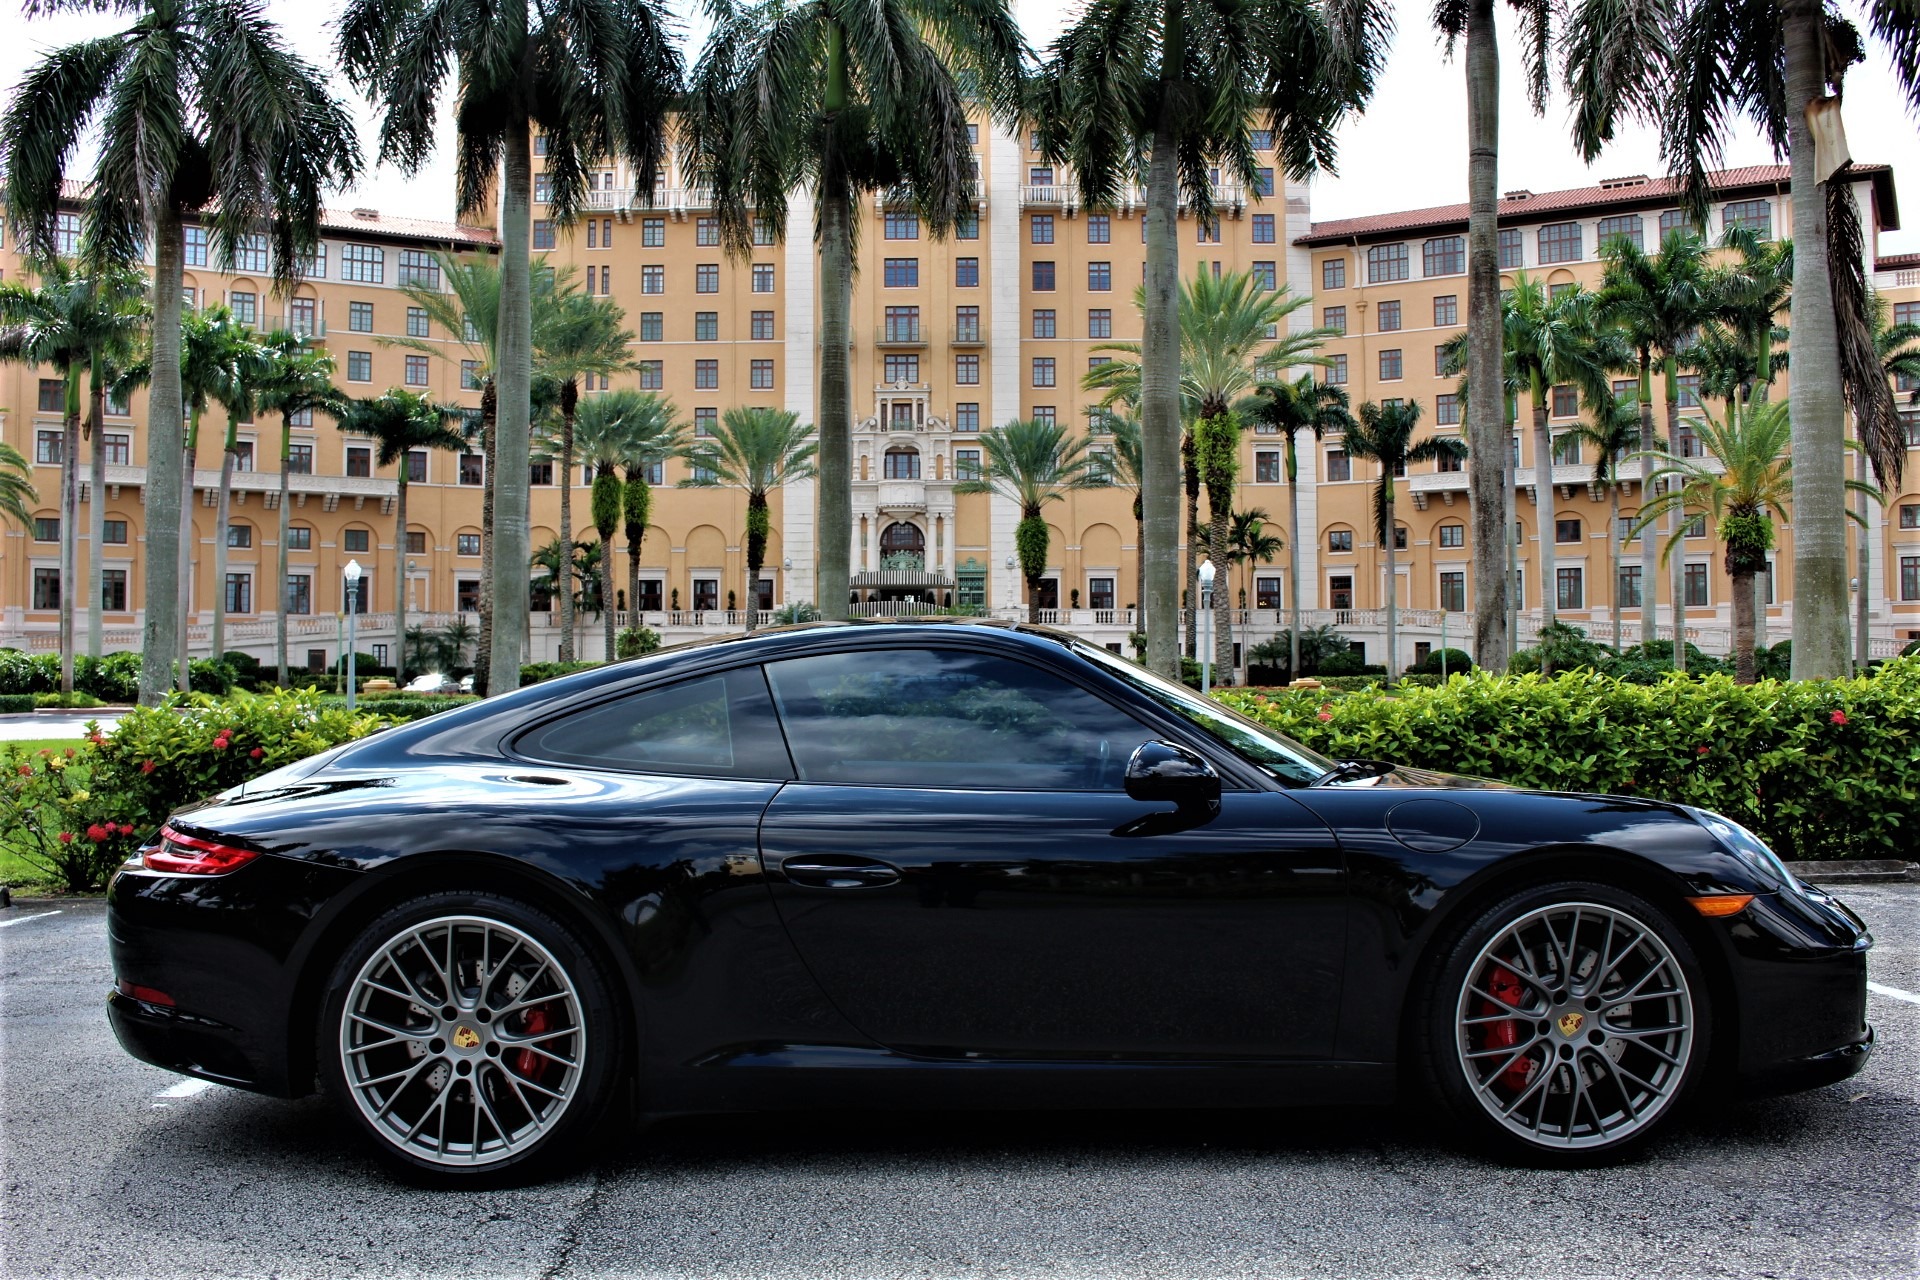 Used 2017 Porsche 911 Carrera S for sale Sold at The Gables Sports Cars in Miami FL 33146 2